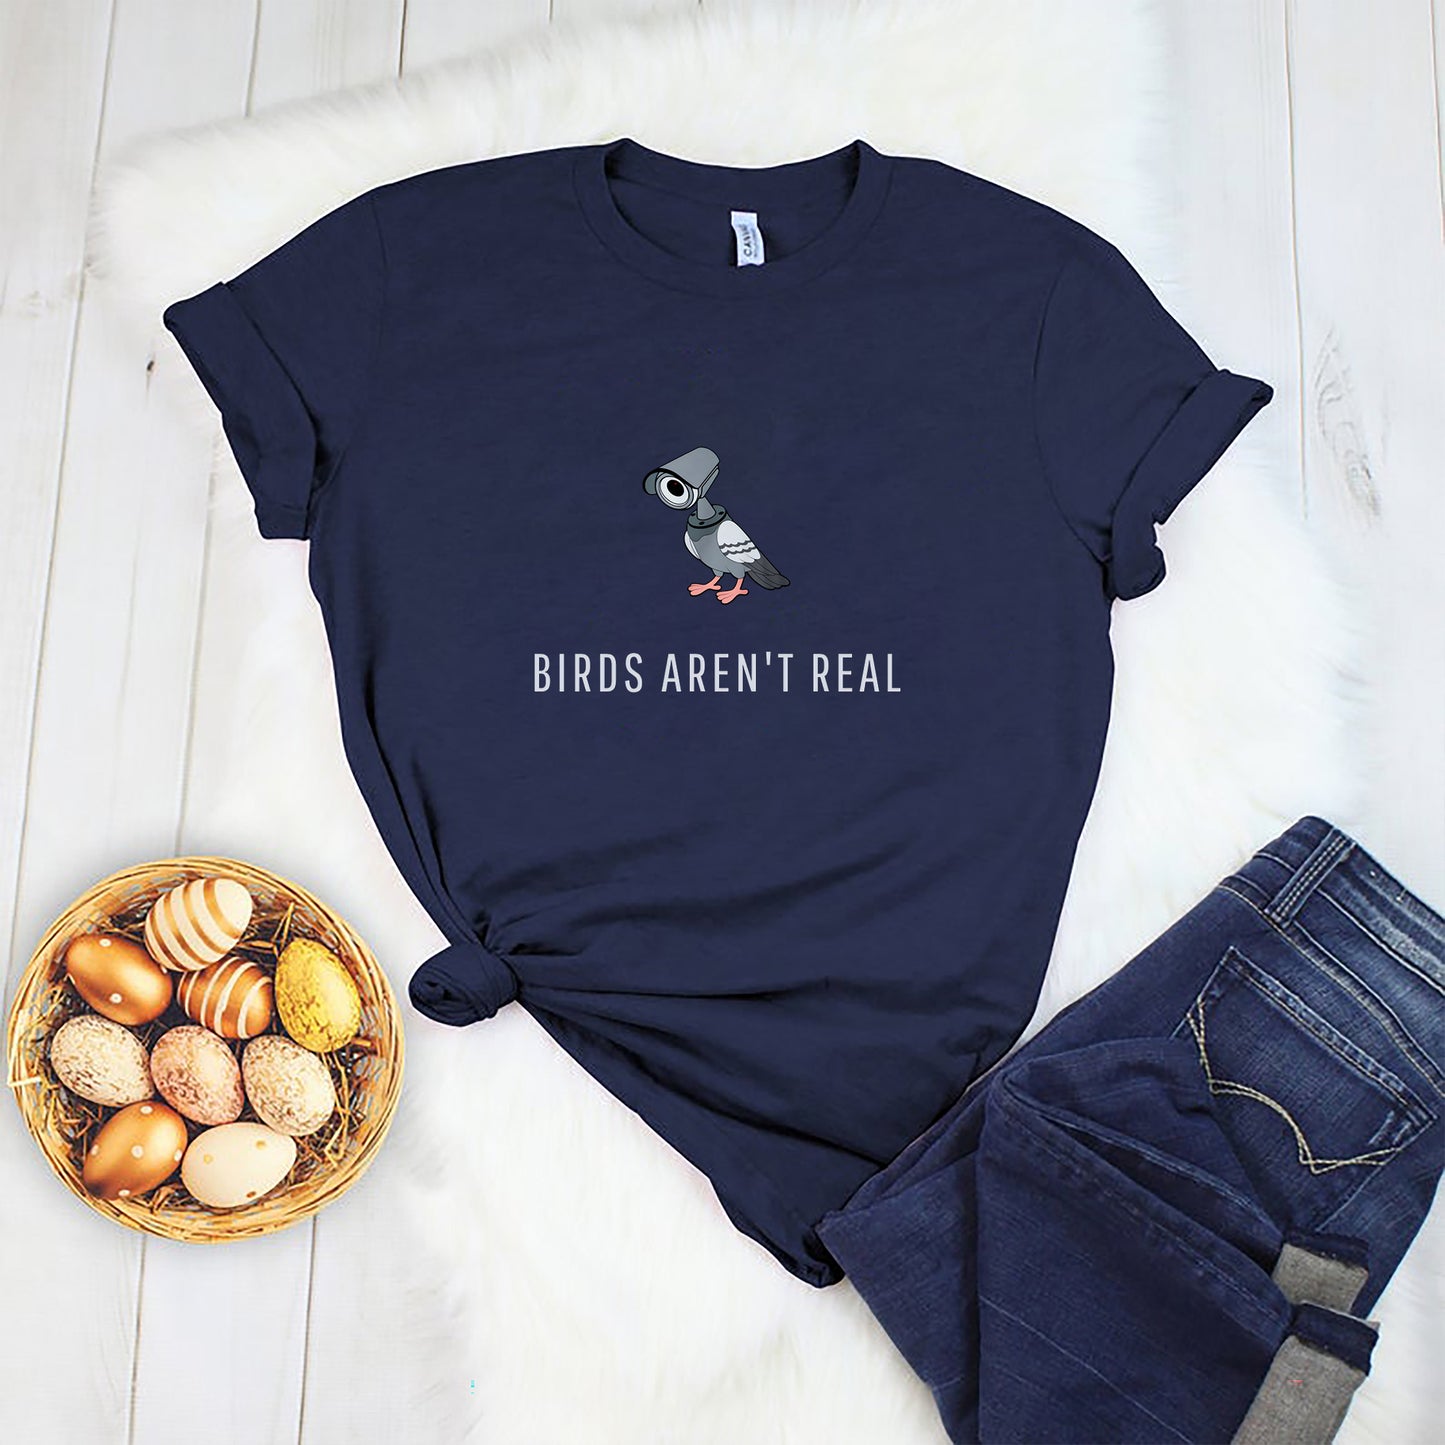 Birds Arent Real Shirt, Gifts For Adults Shirt, Gift For Girl Shirt, Personalized Gift Shirt